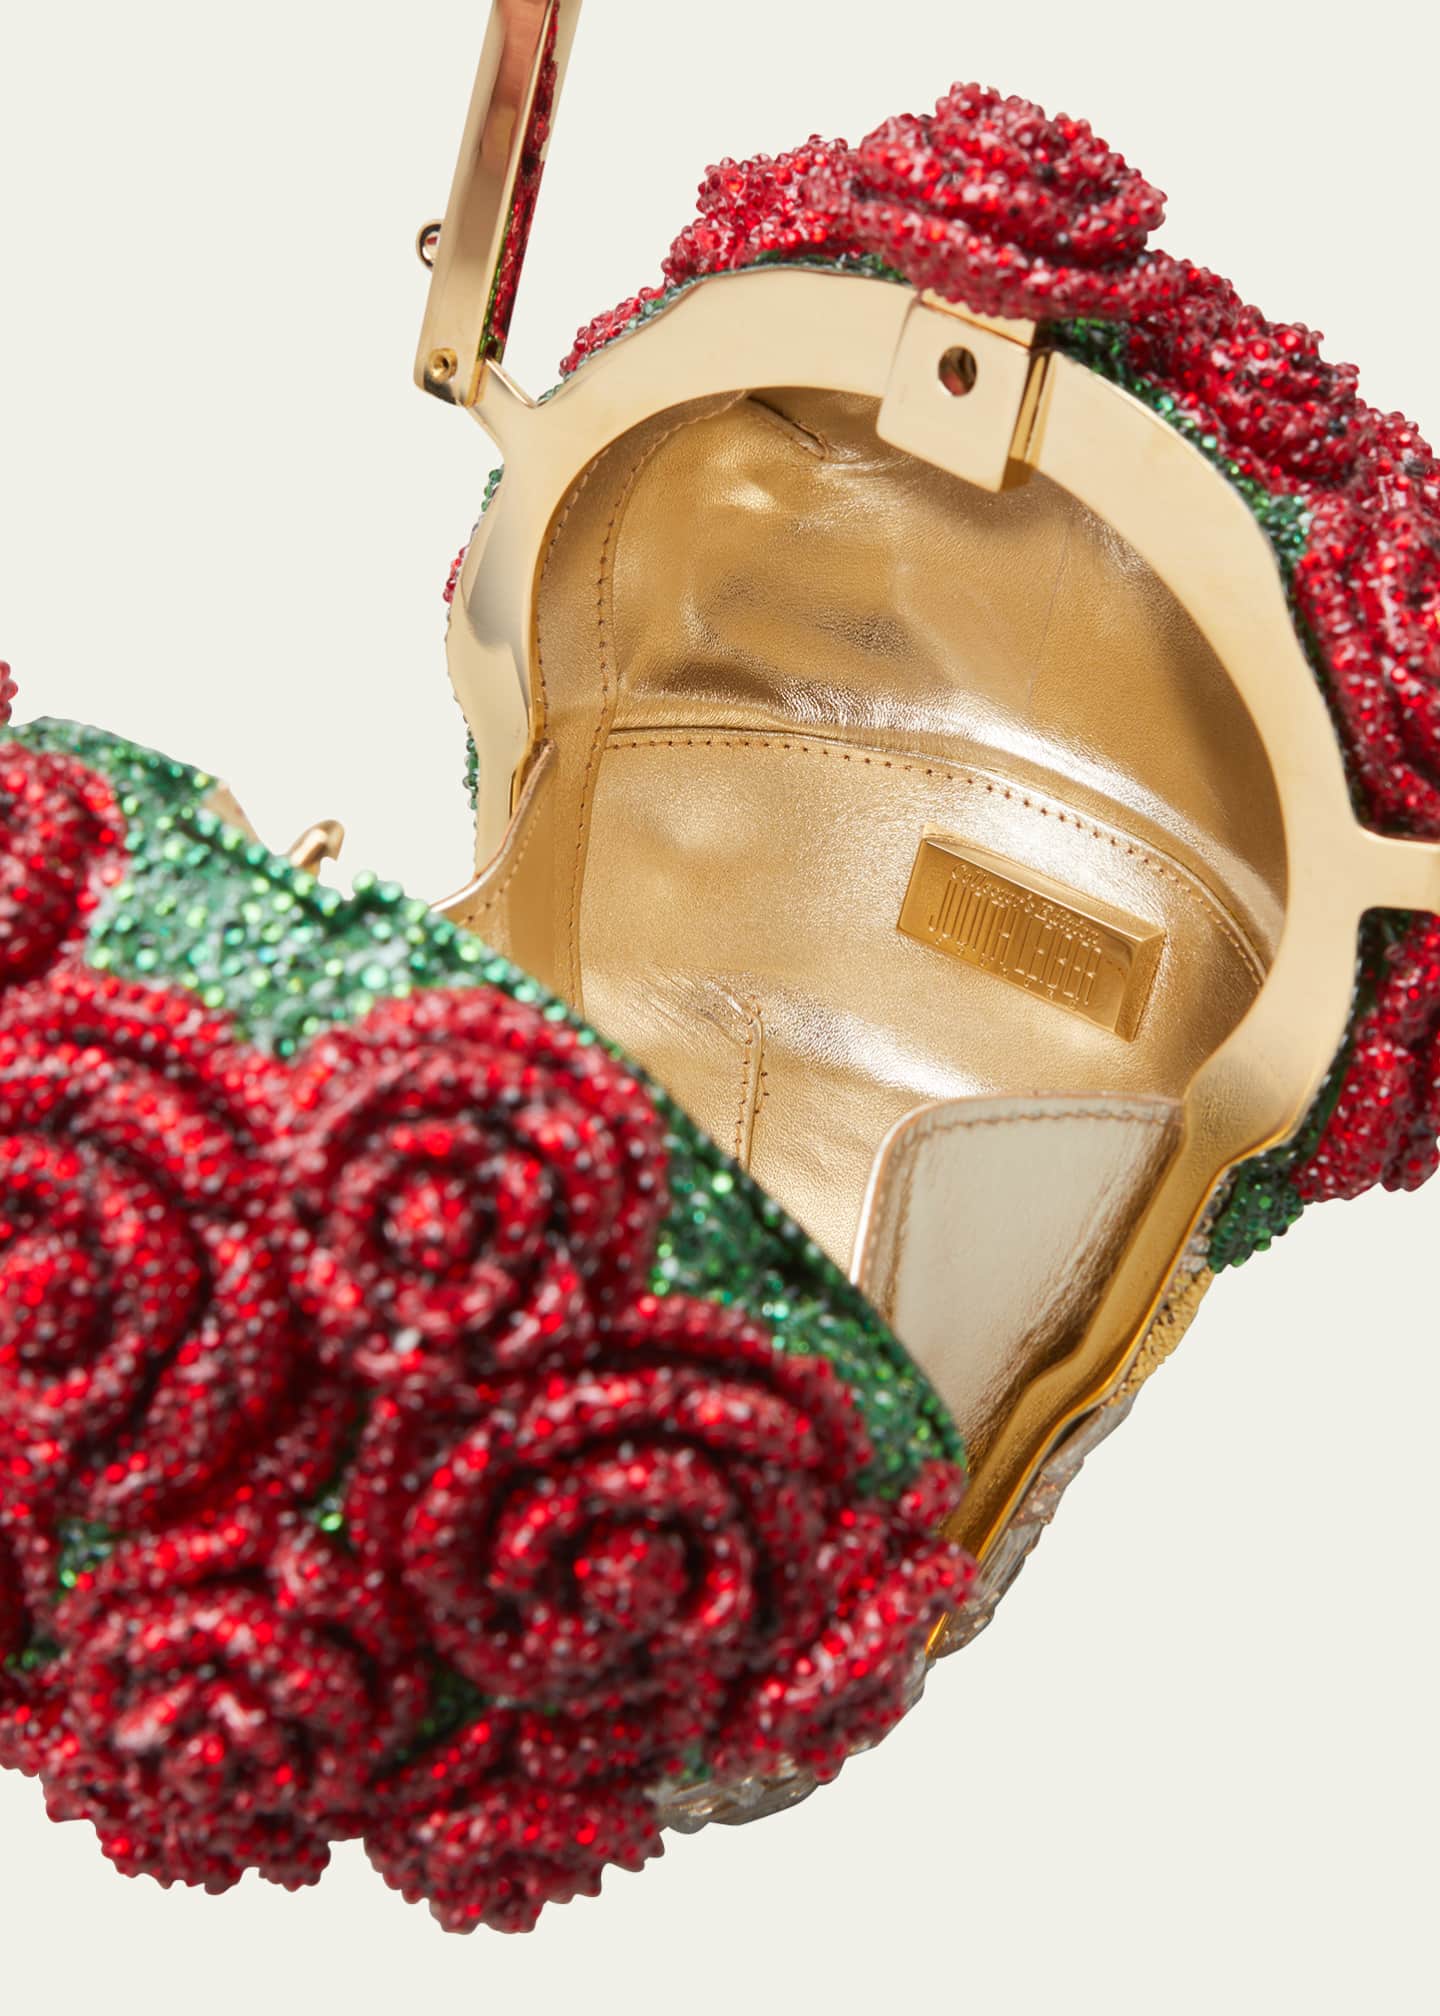 Judith Leiber - Stop and smell the roses with the Rose American Beauty bag.  #JudithLeiberCouture